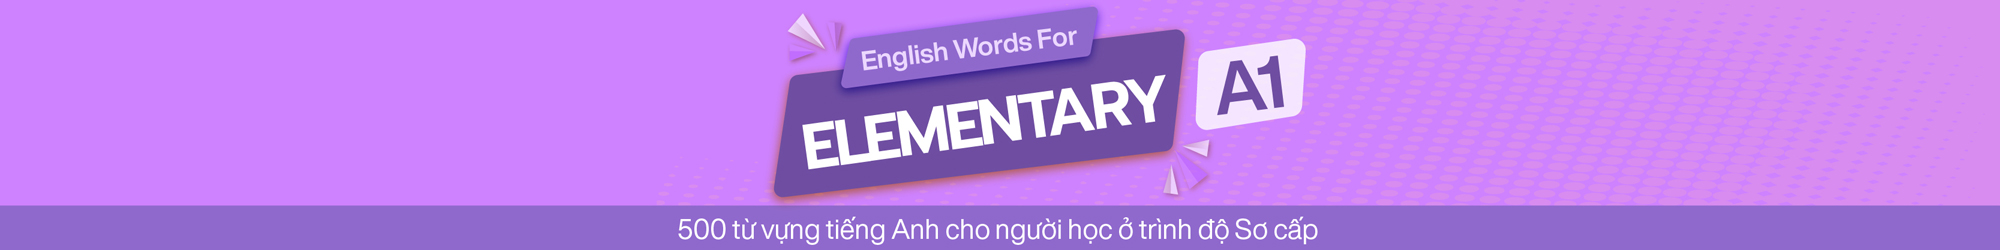 English Words For Elementary (A1)